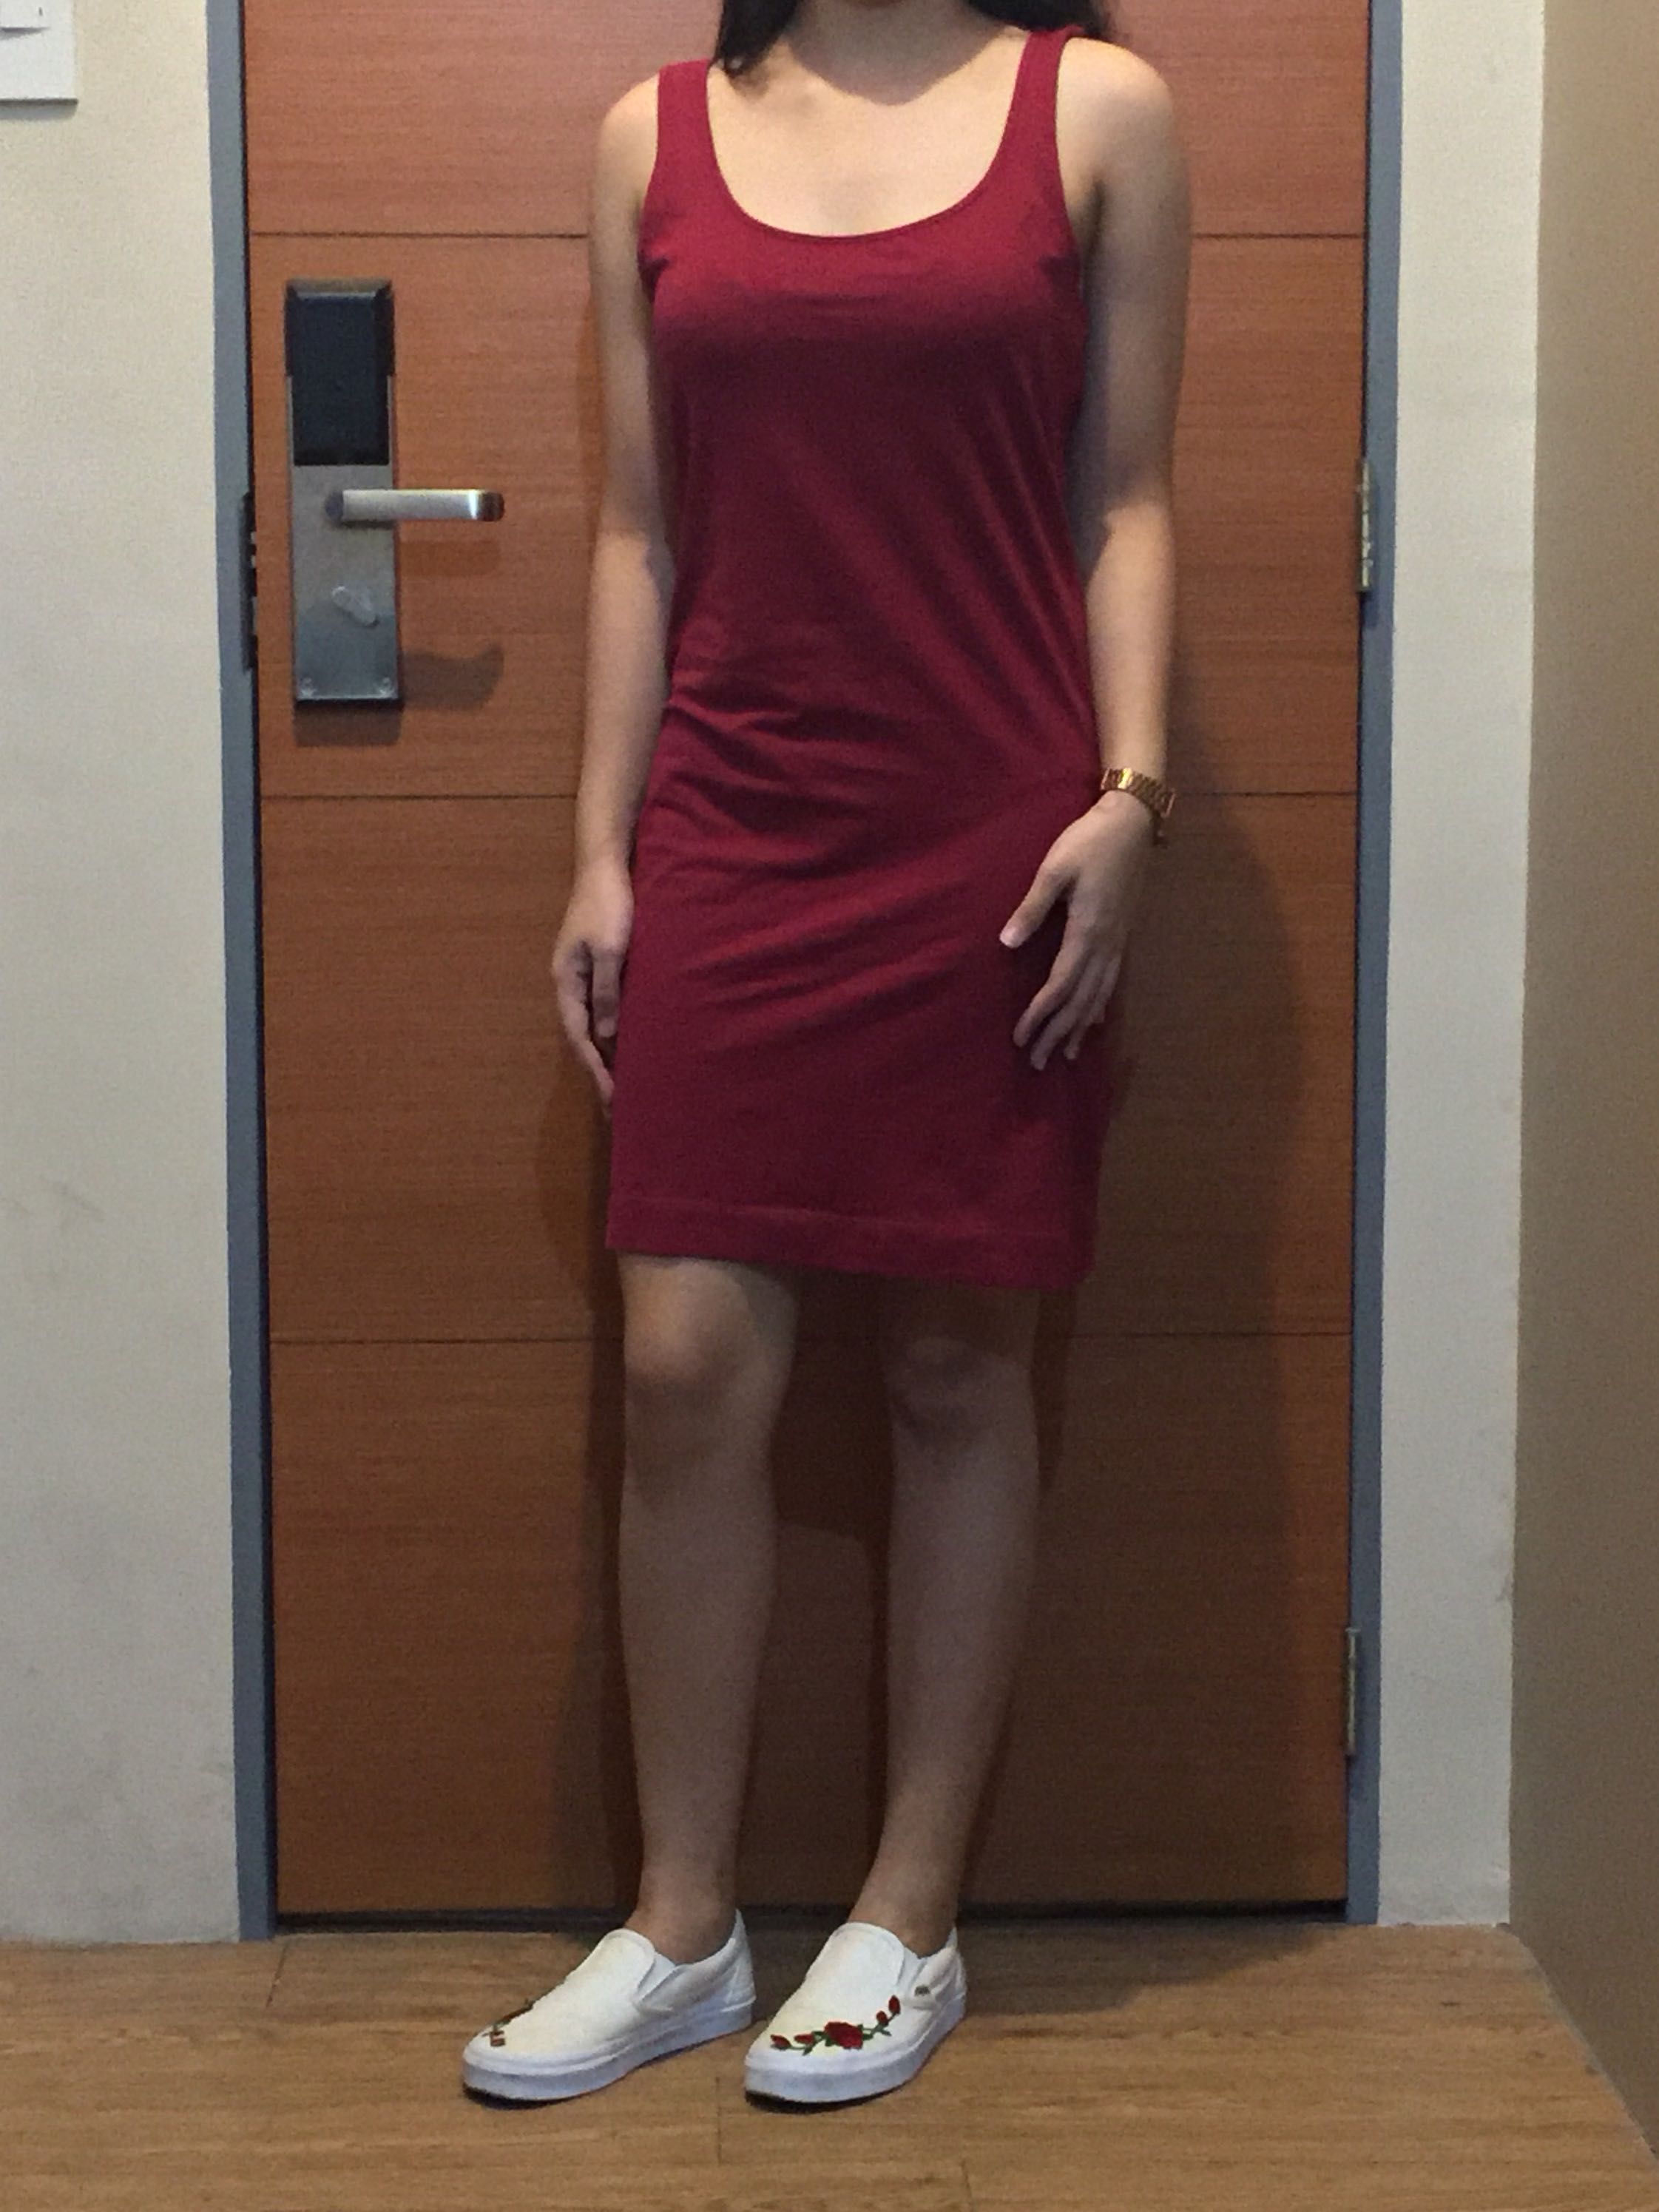 h&m red bodycon dress